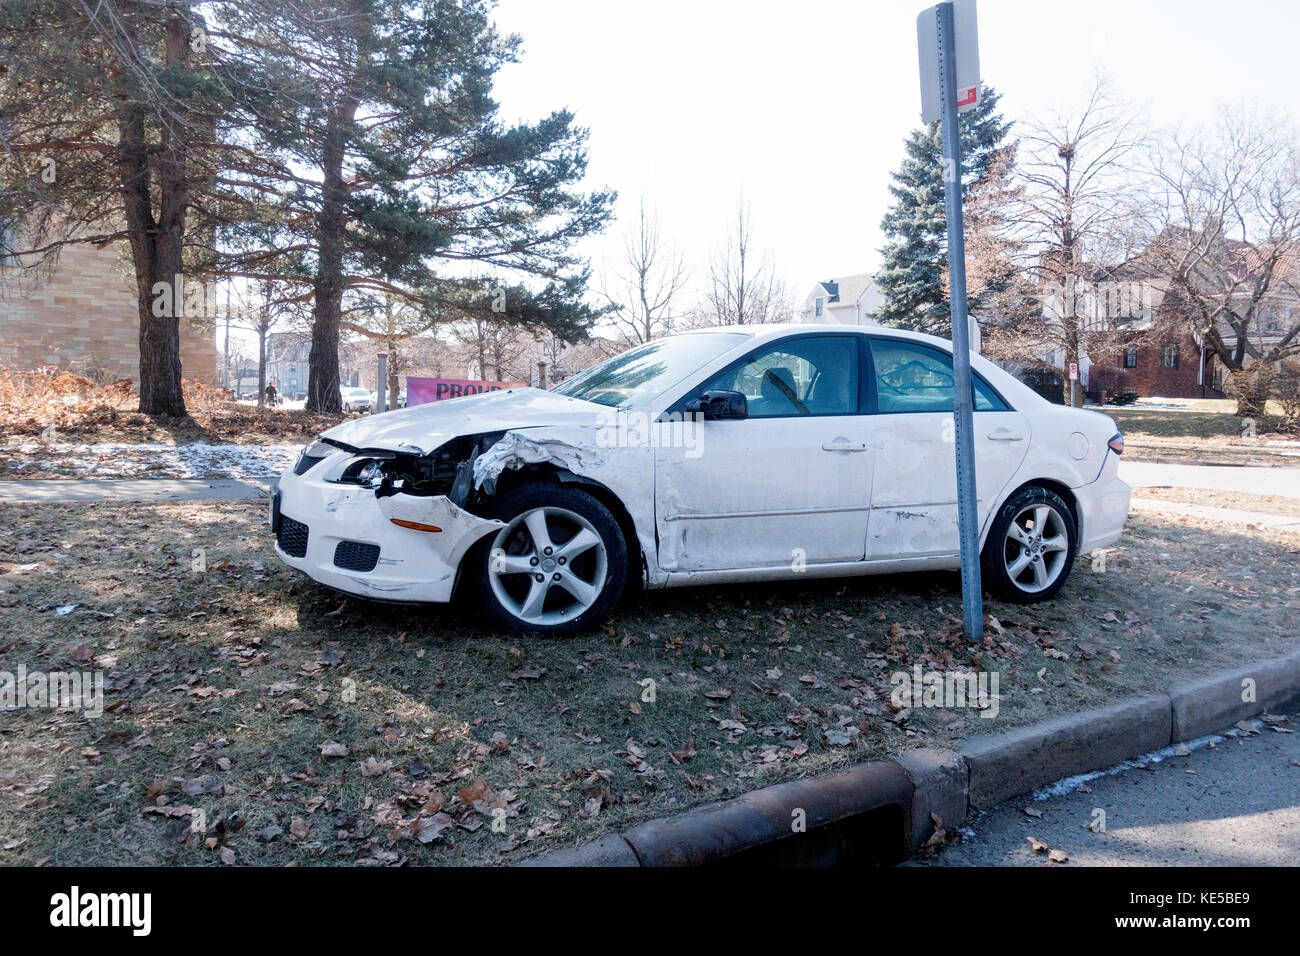 Automobile with crunched up fender ends up on grass after being in an accident. St Paul Minnesota MN USA Stock Photo